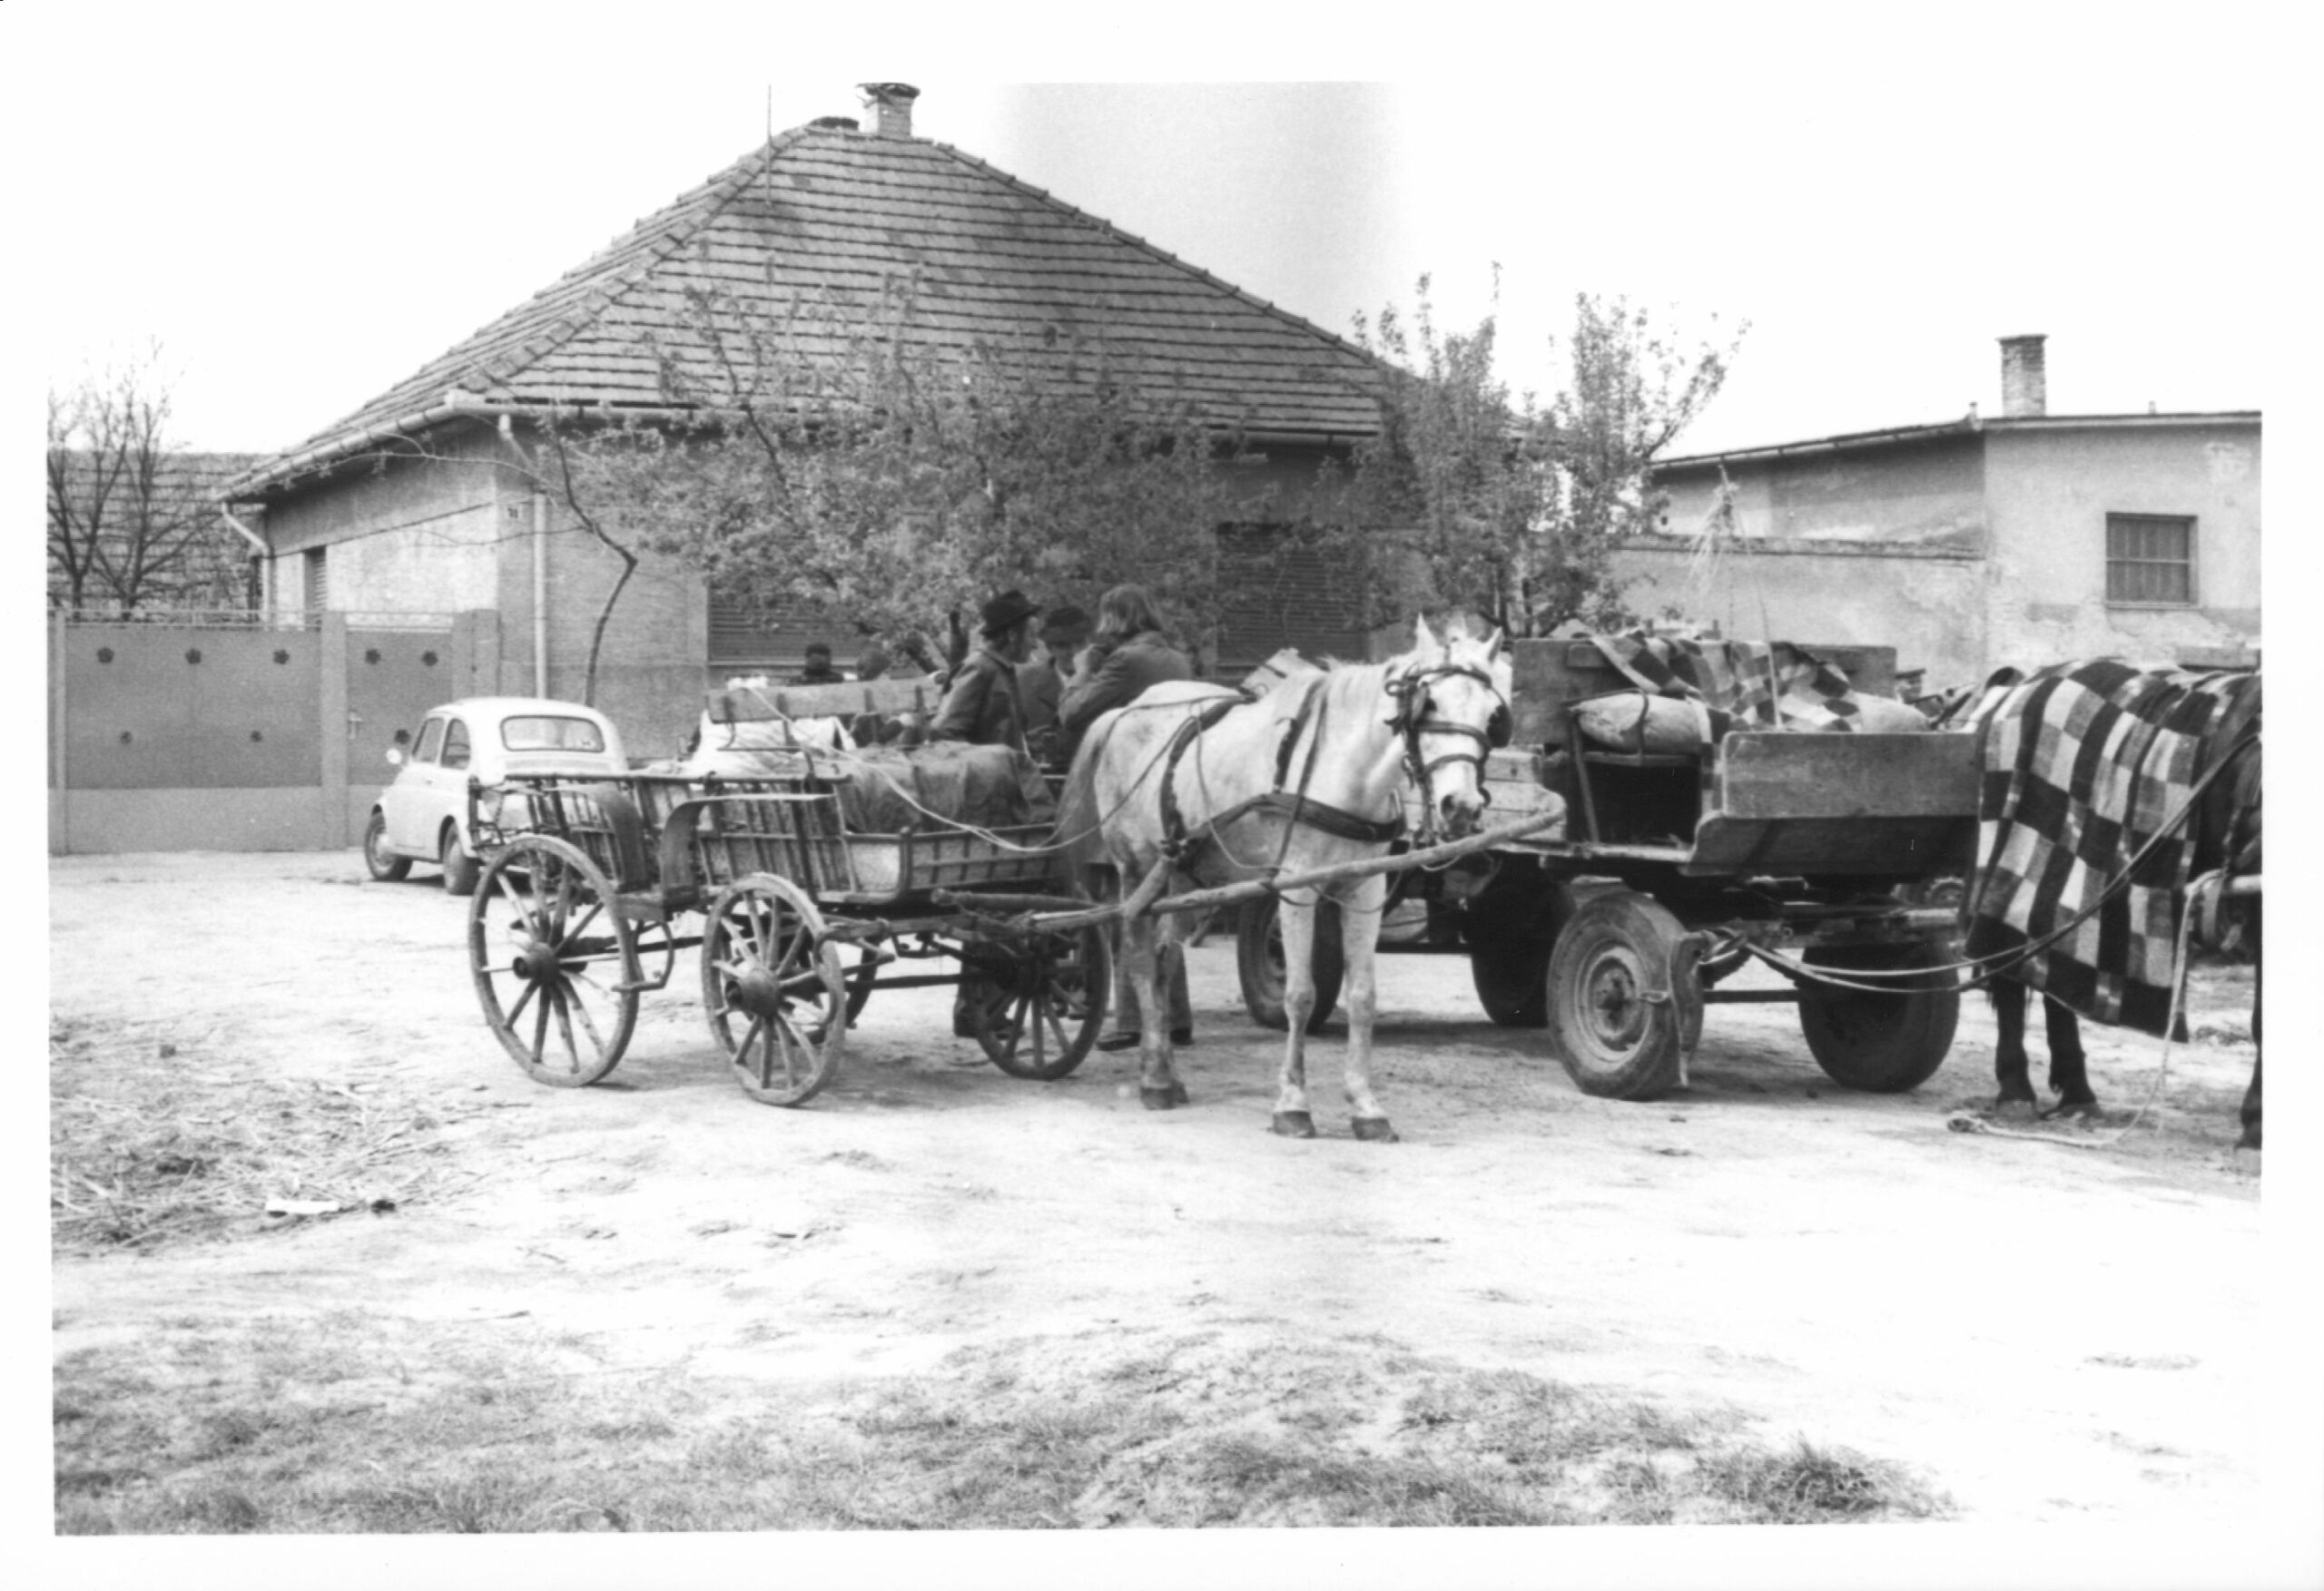 An old cart in front of a modern house in the village centre, 1977